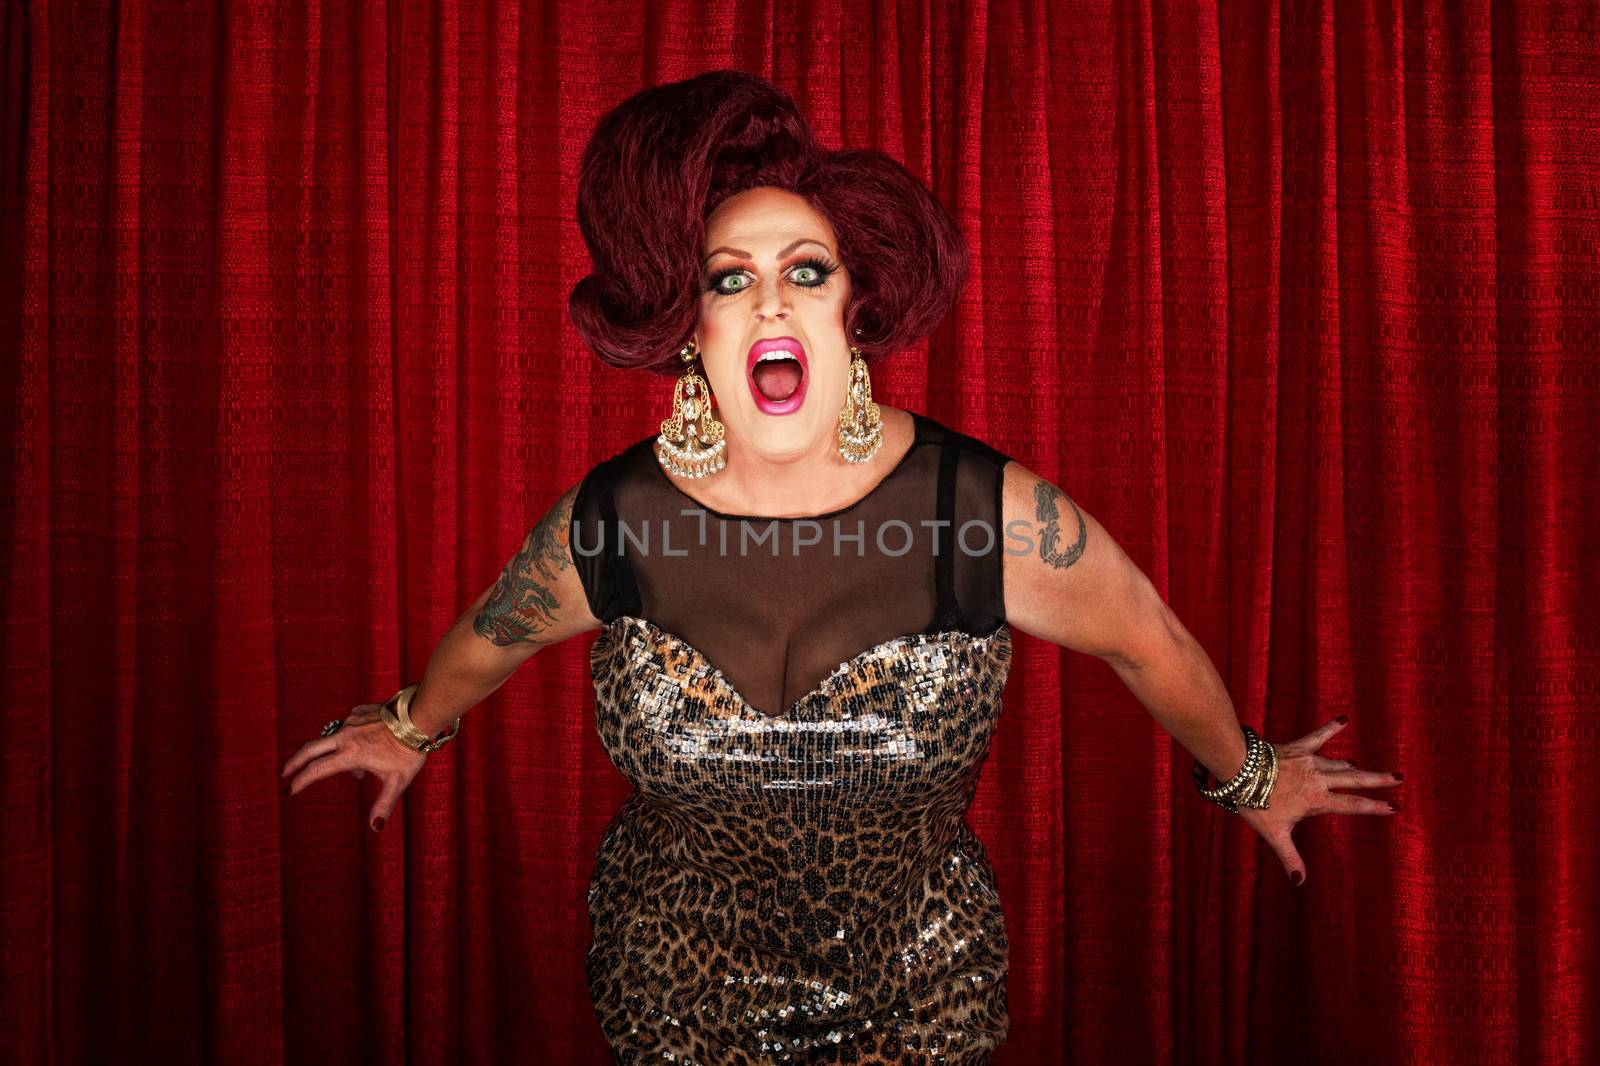 Drag queen screaming or singing in theater